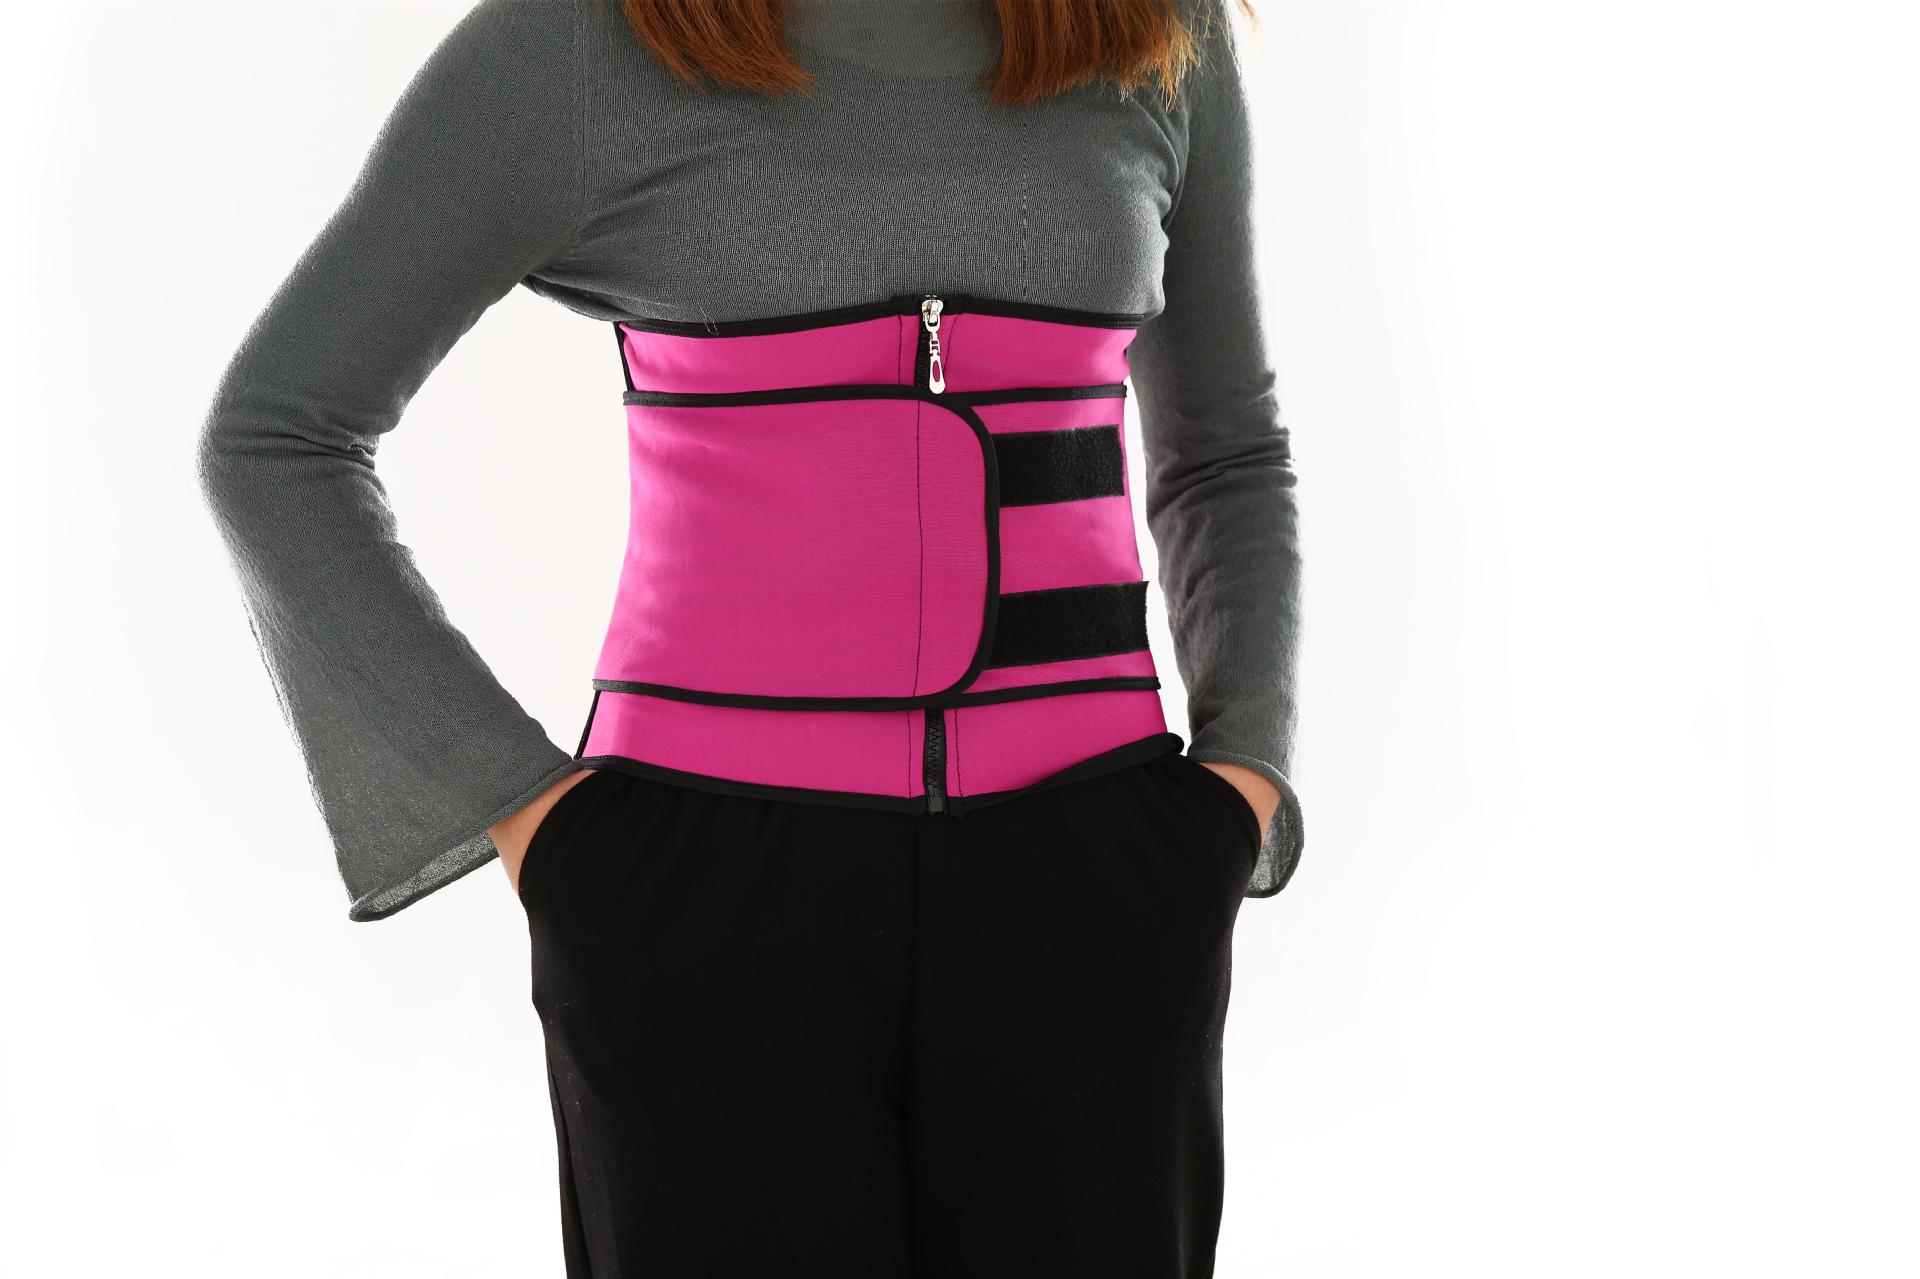 Belly in Europe and the United States cross-border palace with female money toning belt tucked up with supporting the chest closed abdominal belt